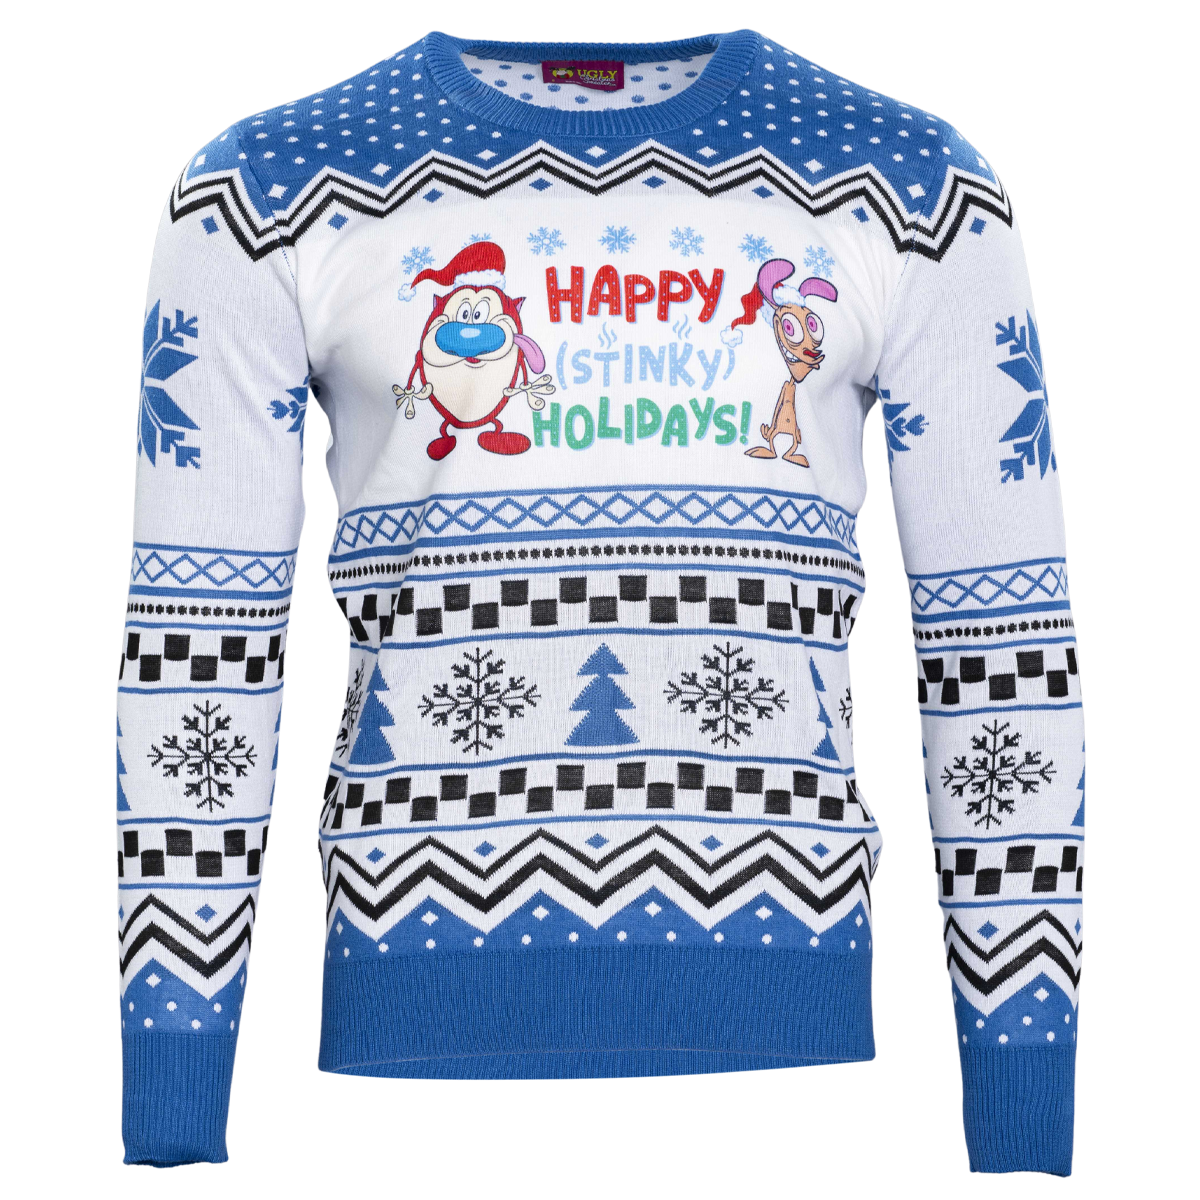 Happy (Stinky) Holidays Ren and Stimpy Character Sweater